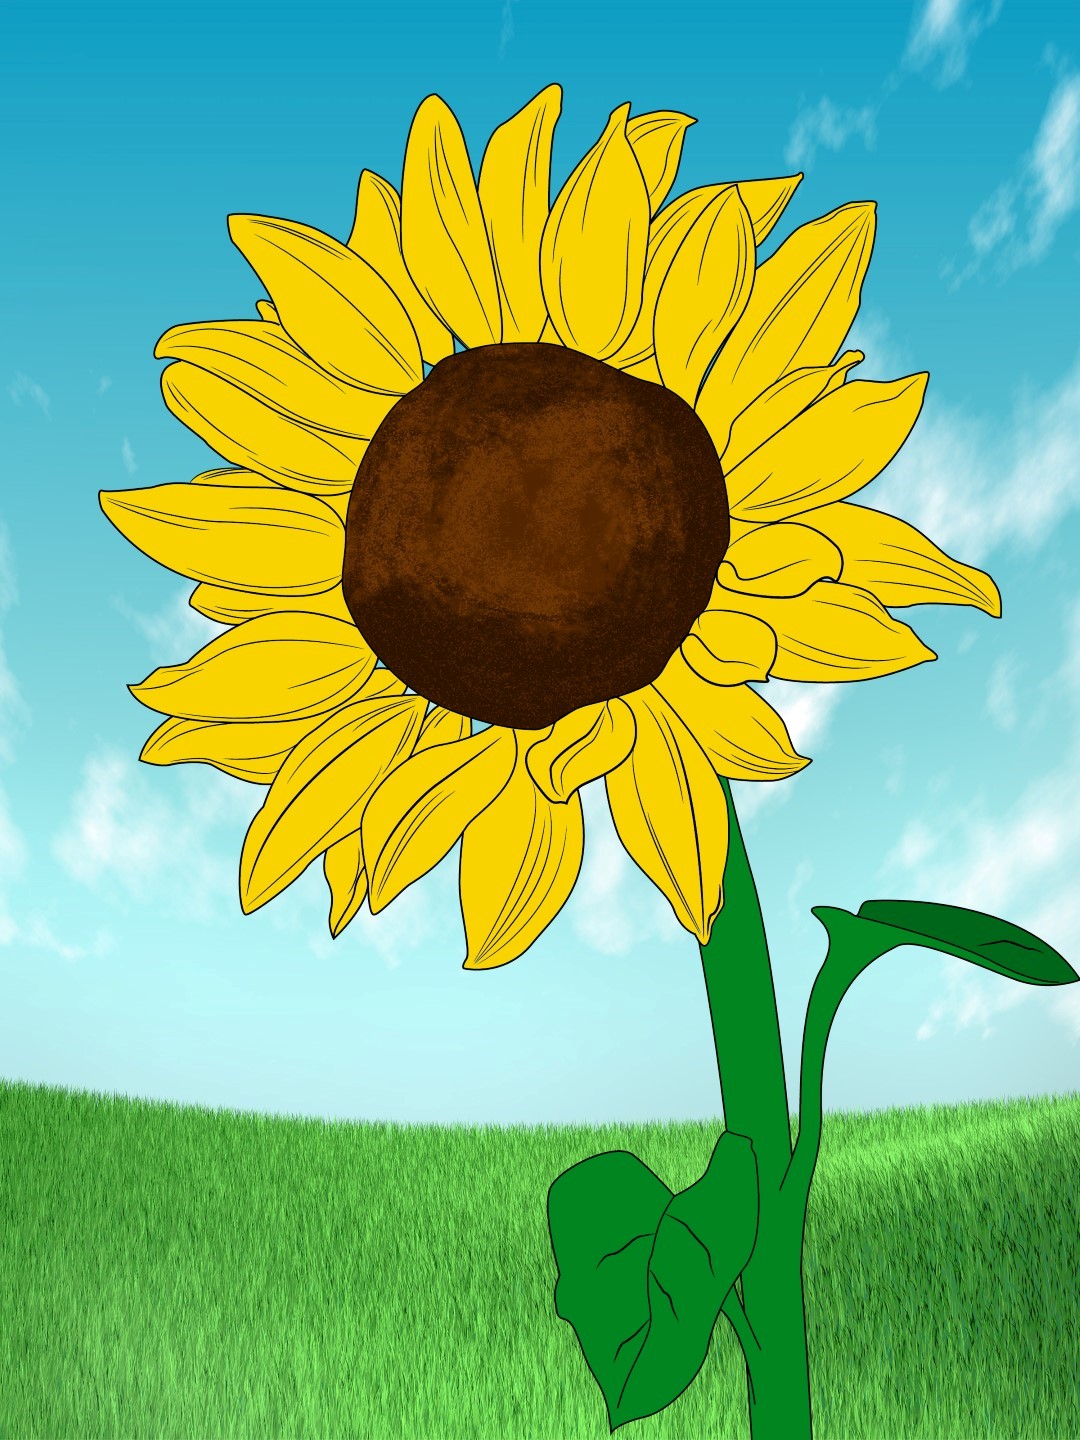 1080x1440 How To Draw A Sunflower - Sunflower Drawing Tutorial. 